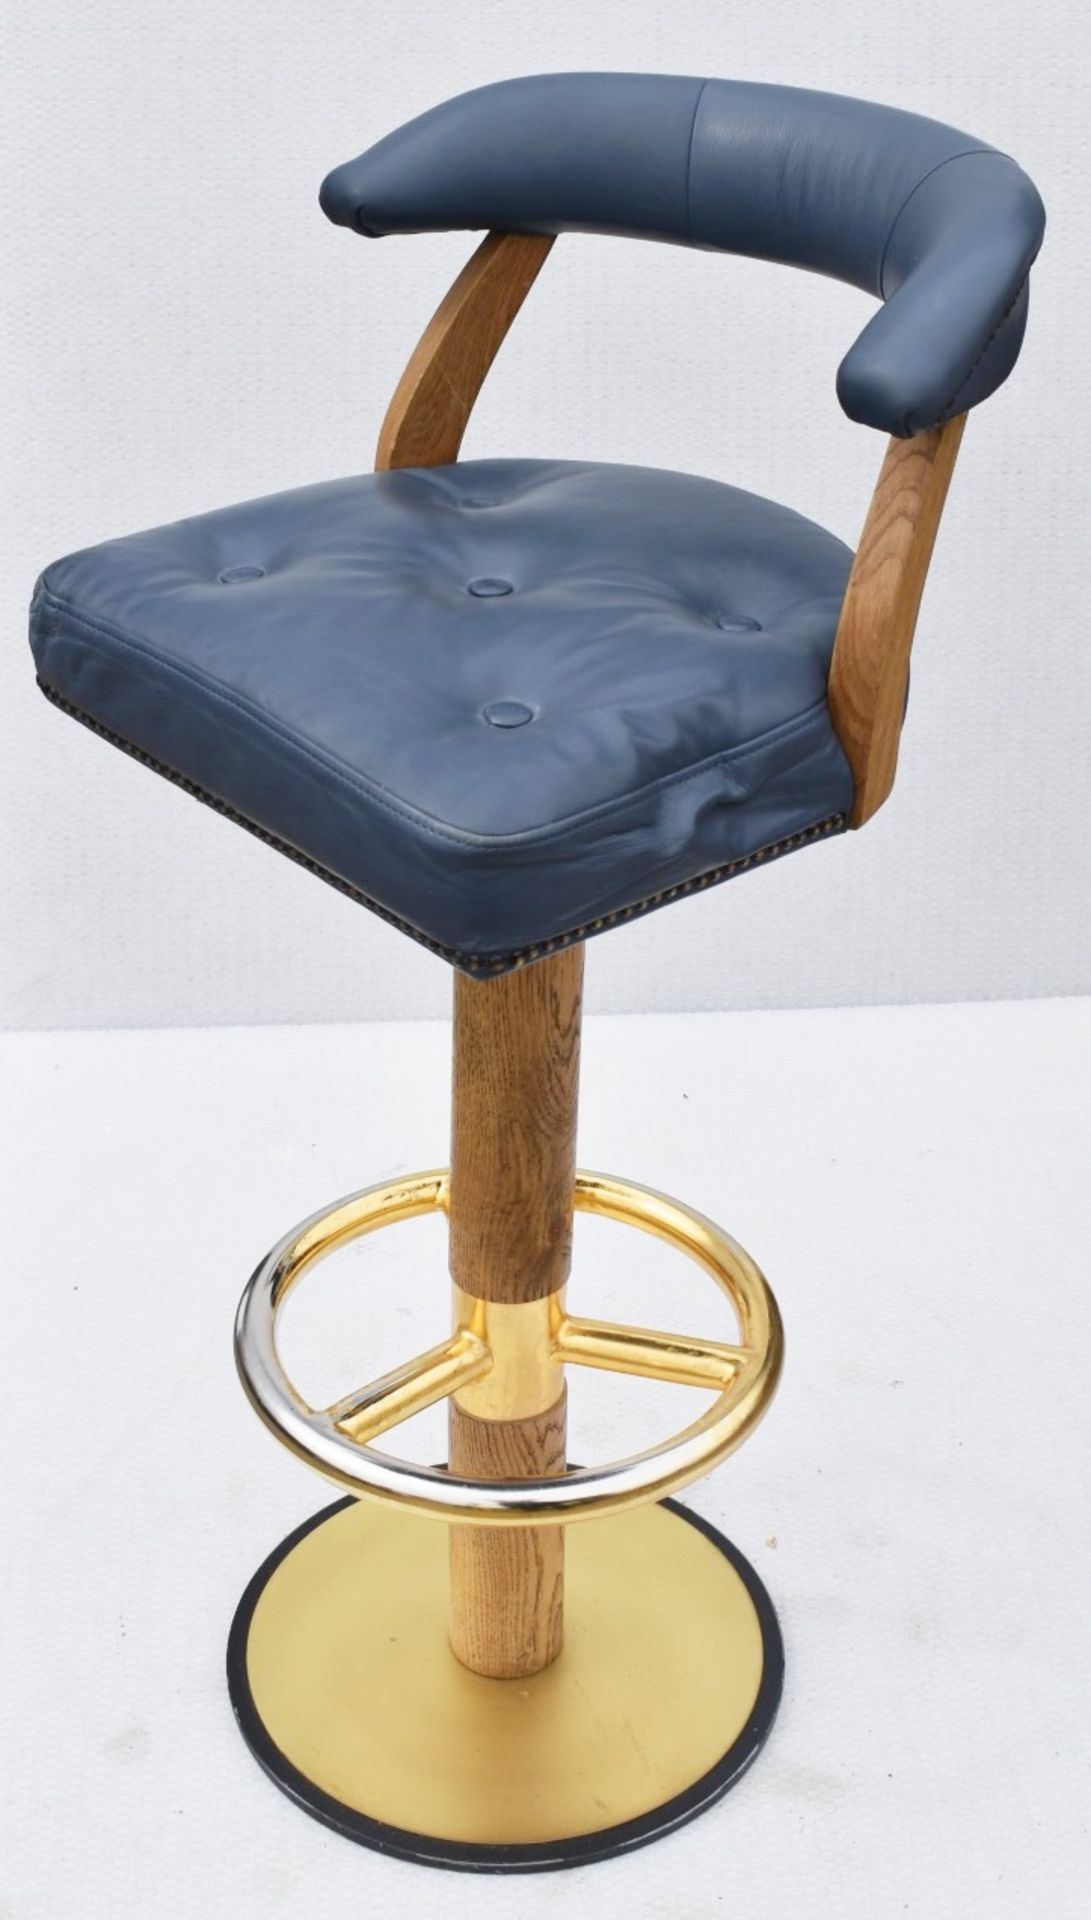 1 x Luxury Buttoned Bar Stool with Wooden Frame, Metal Base, Footrest and Studded Upholstery in a - Image 2 of 8